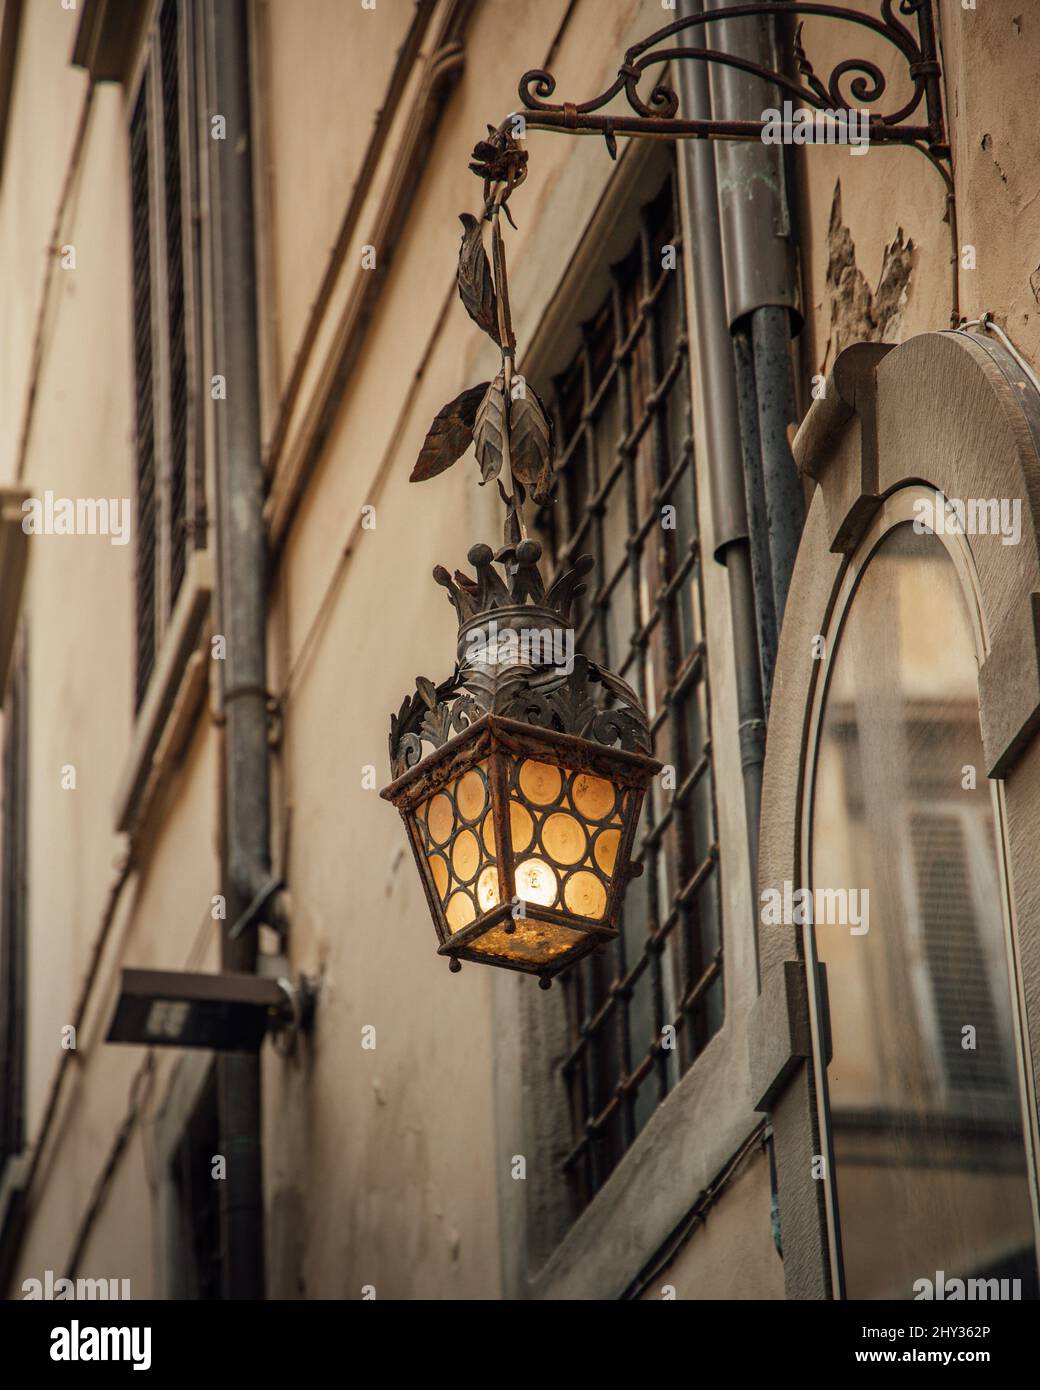 Vertical shot of a street lamp hanging from a metallic curved metal on the window. Stock Photo